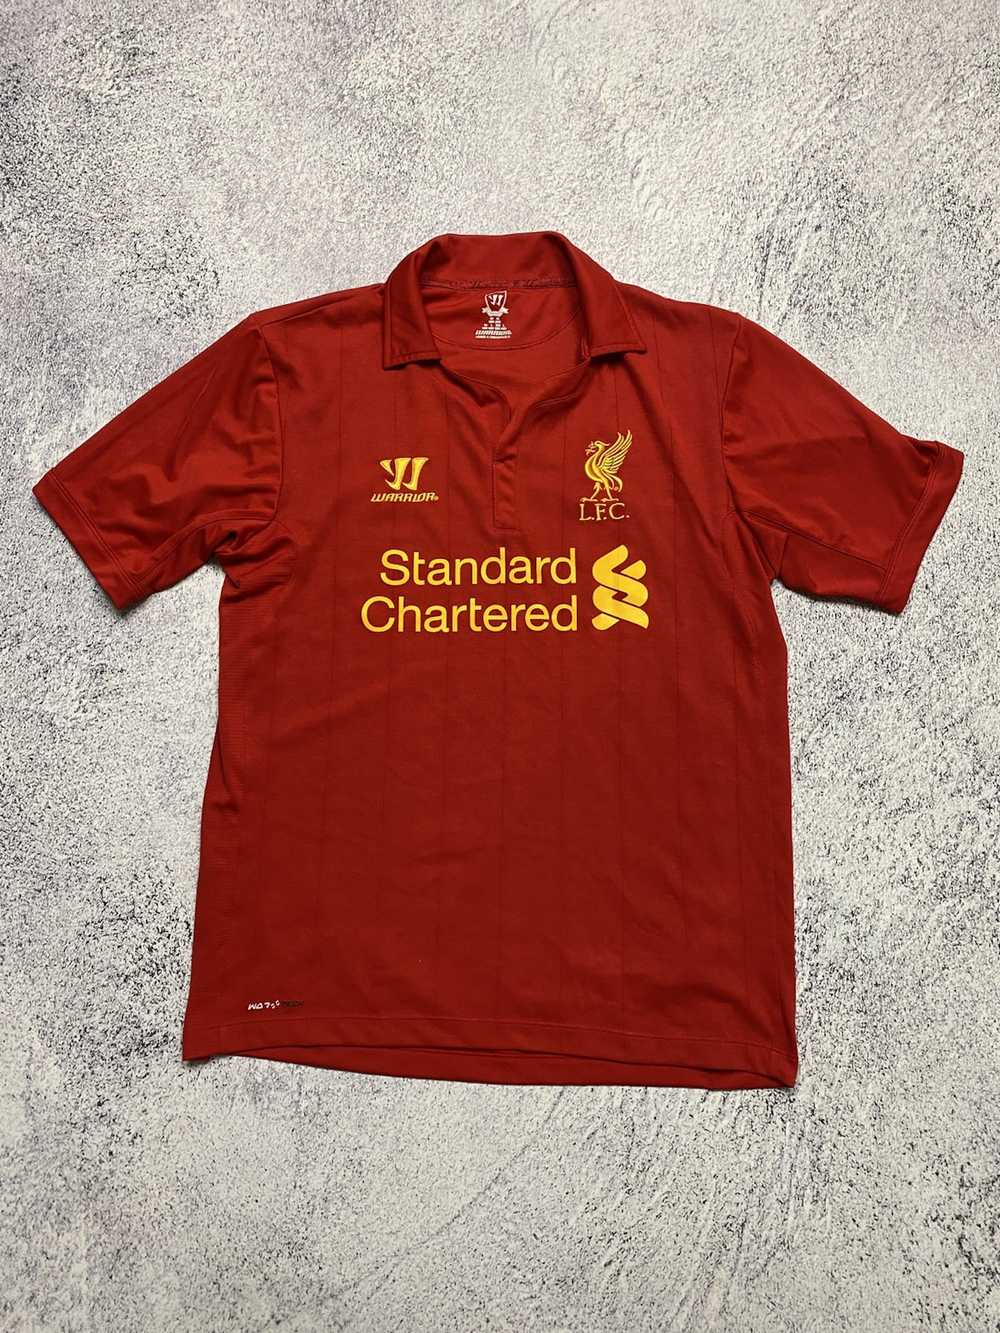 Jersey × Liverpool × Soccer Jersey Liverpool 2012… - image 1